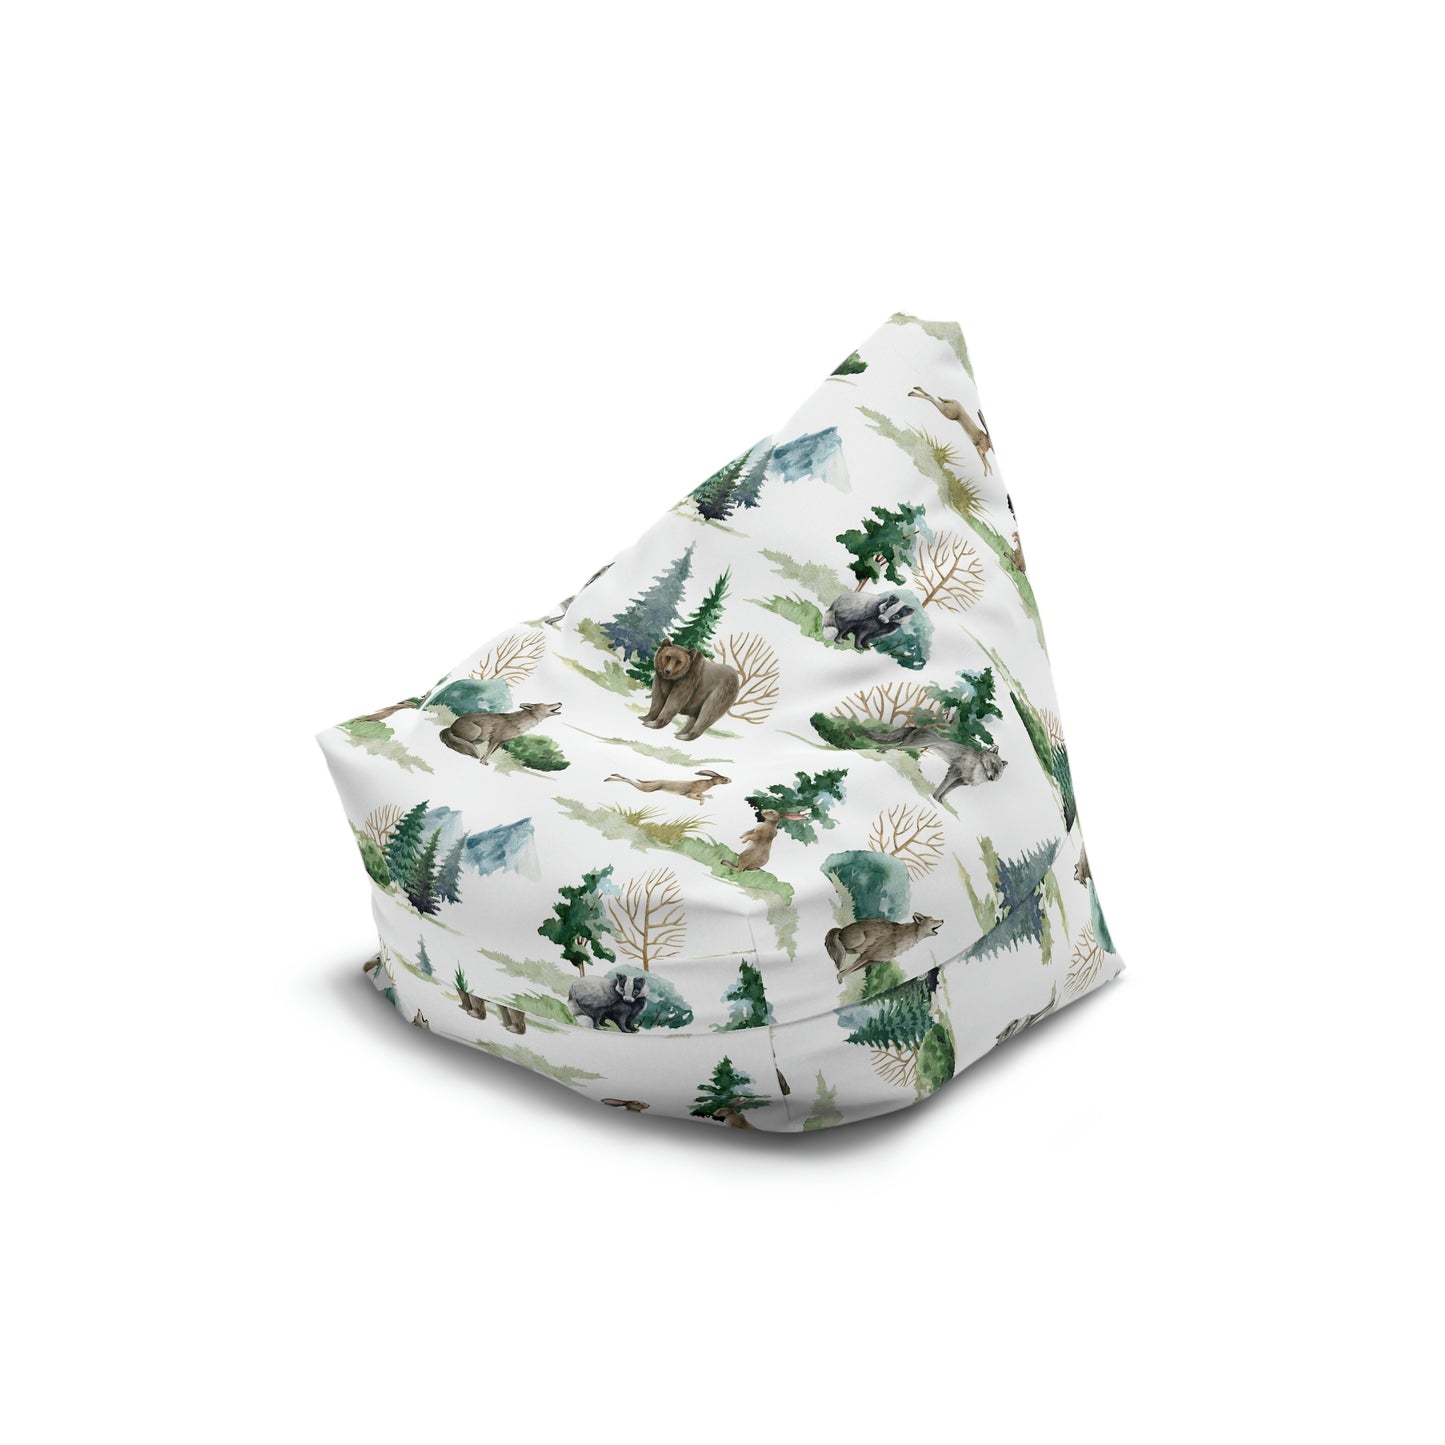 Wild Forest Animals Bean Bag Chair Cover